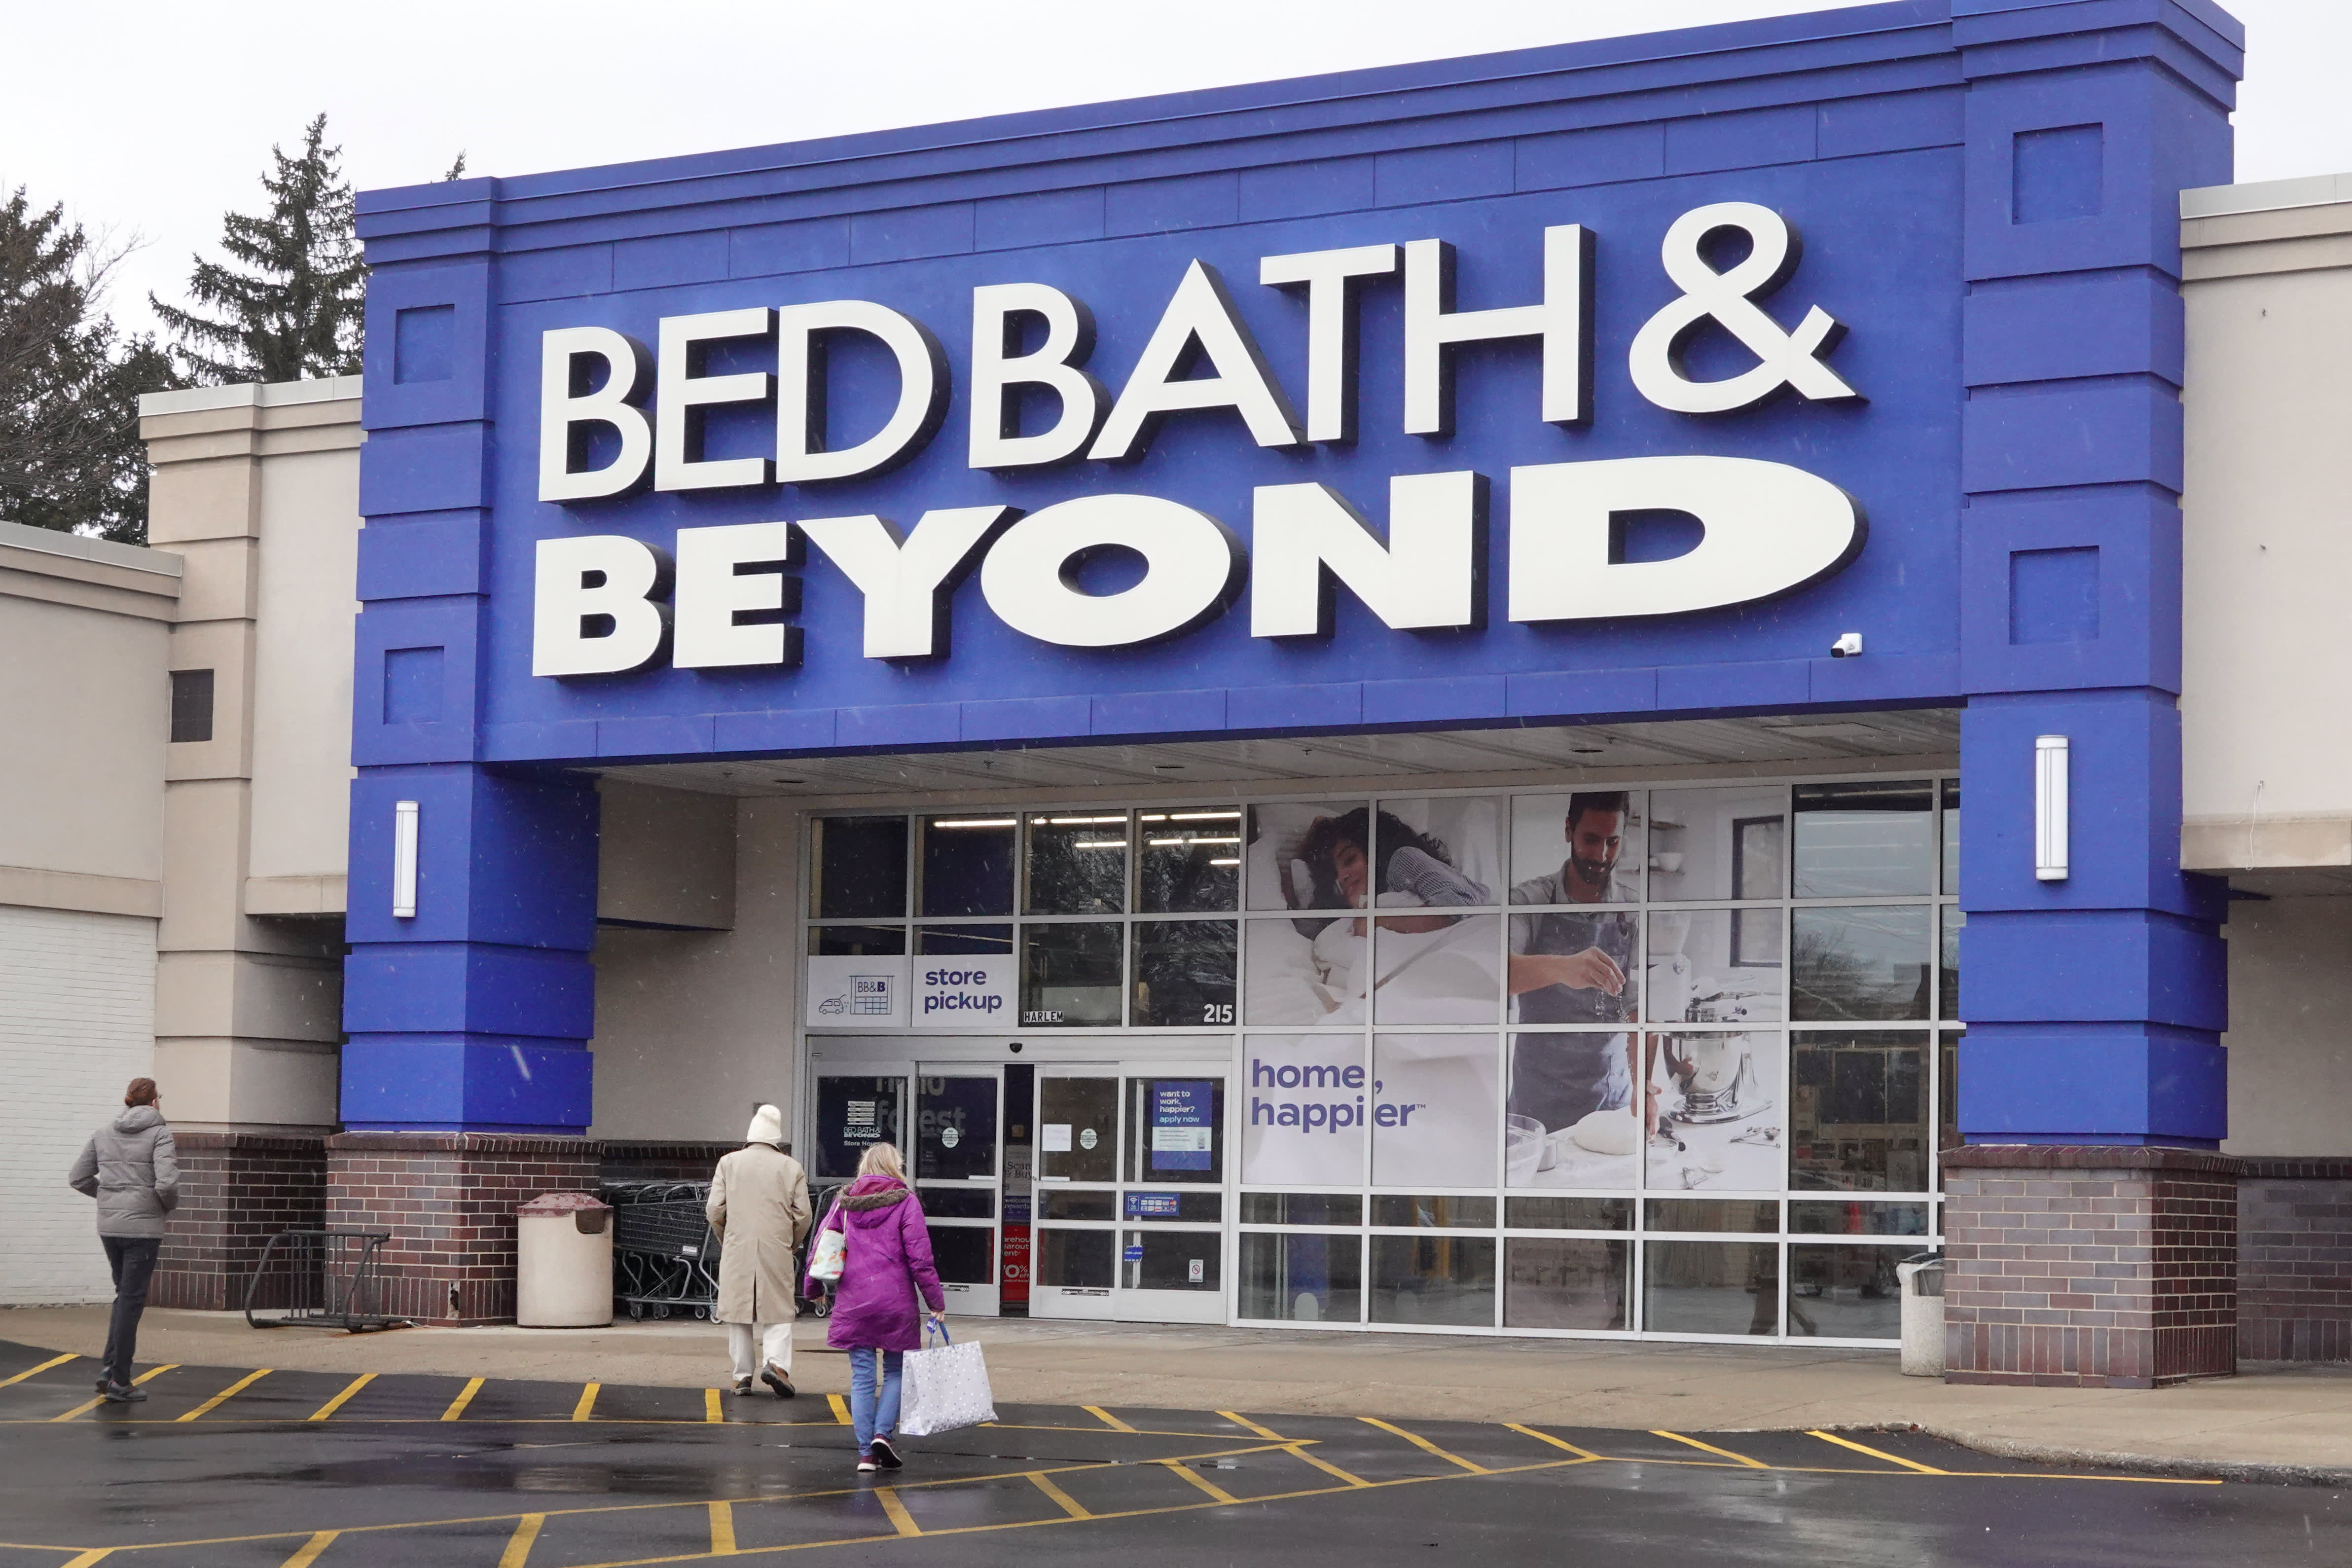 KeyBanc says former meme stock Bed Bath & Beyond will fall to 10 cents after bankruptcy warning